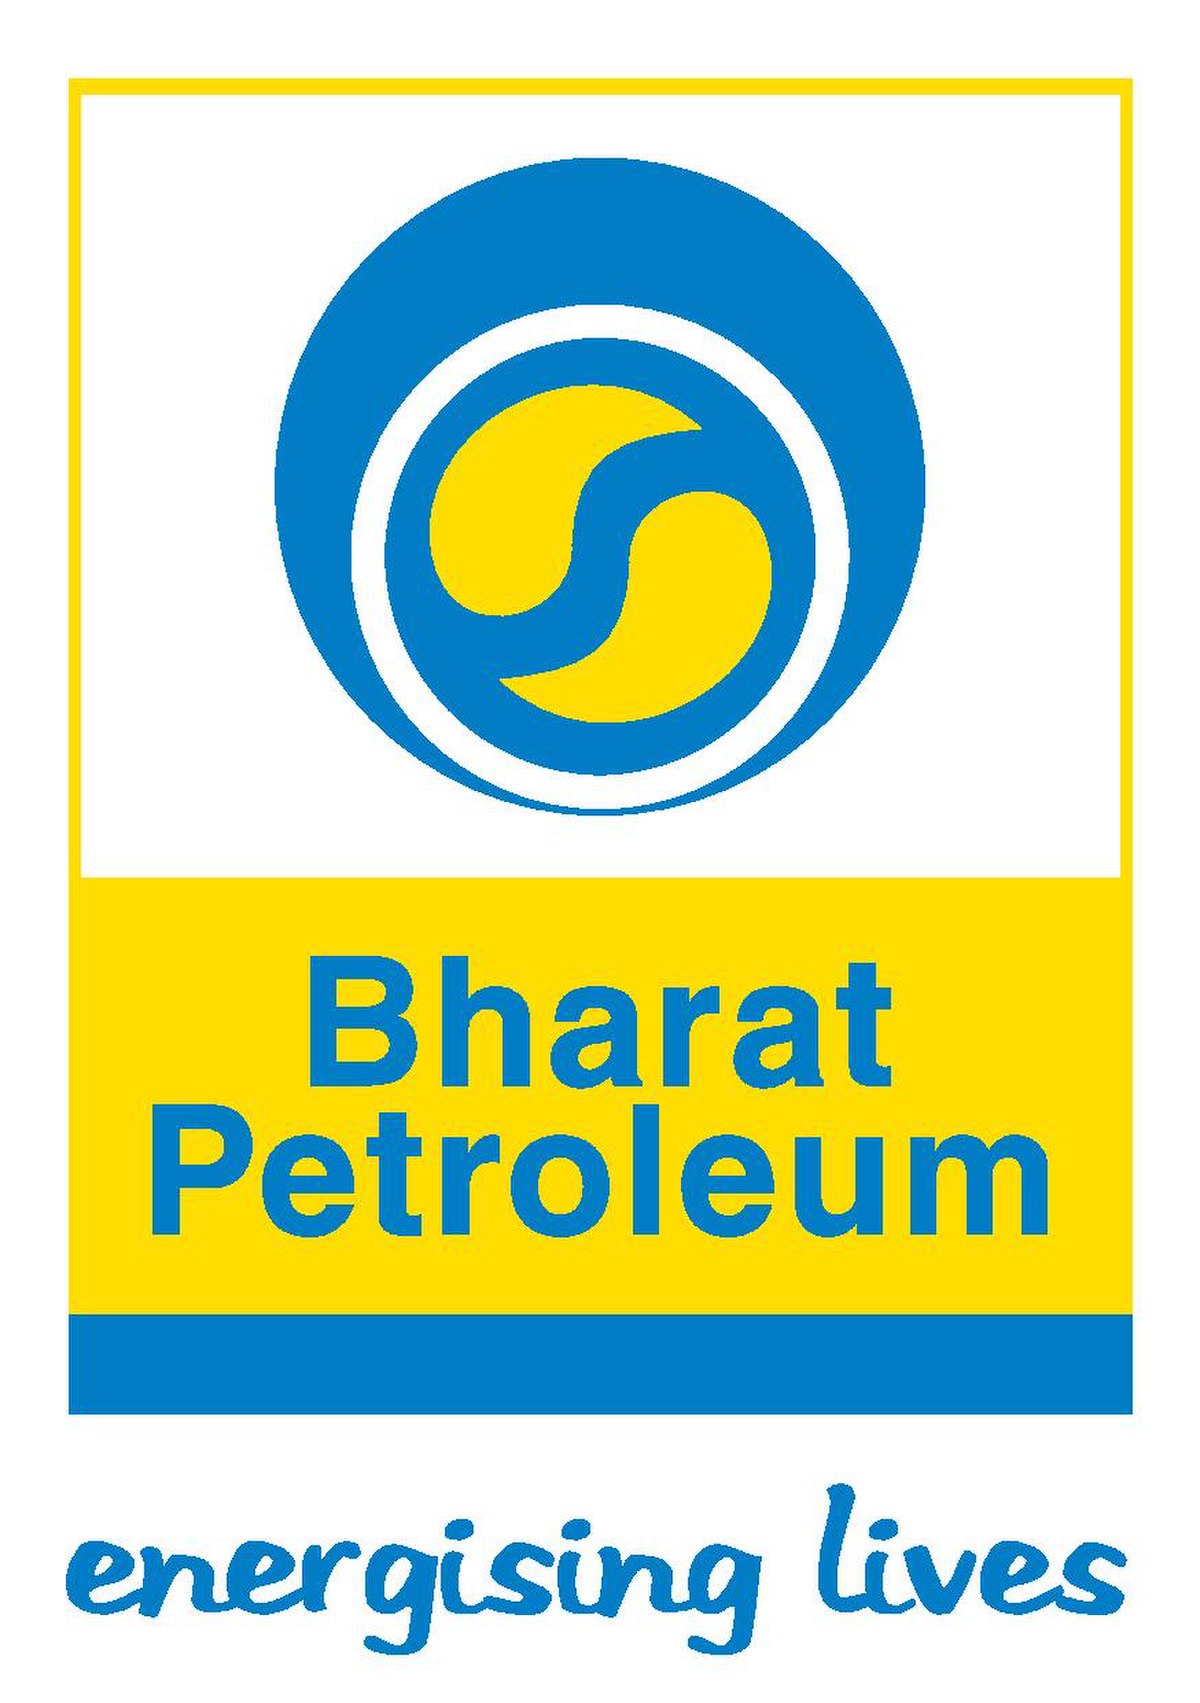 BPCL lines up $18.16 bn for expansion in oil, green energy in next 5 years,  ET Government